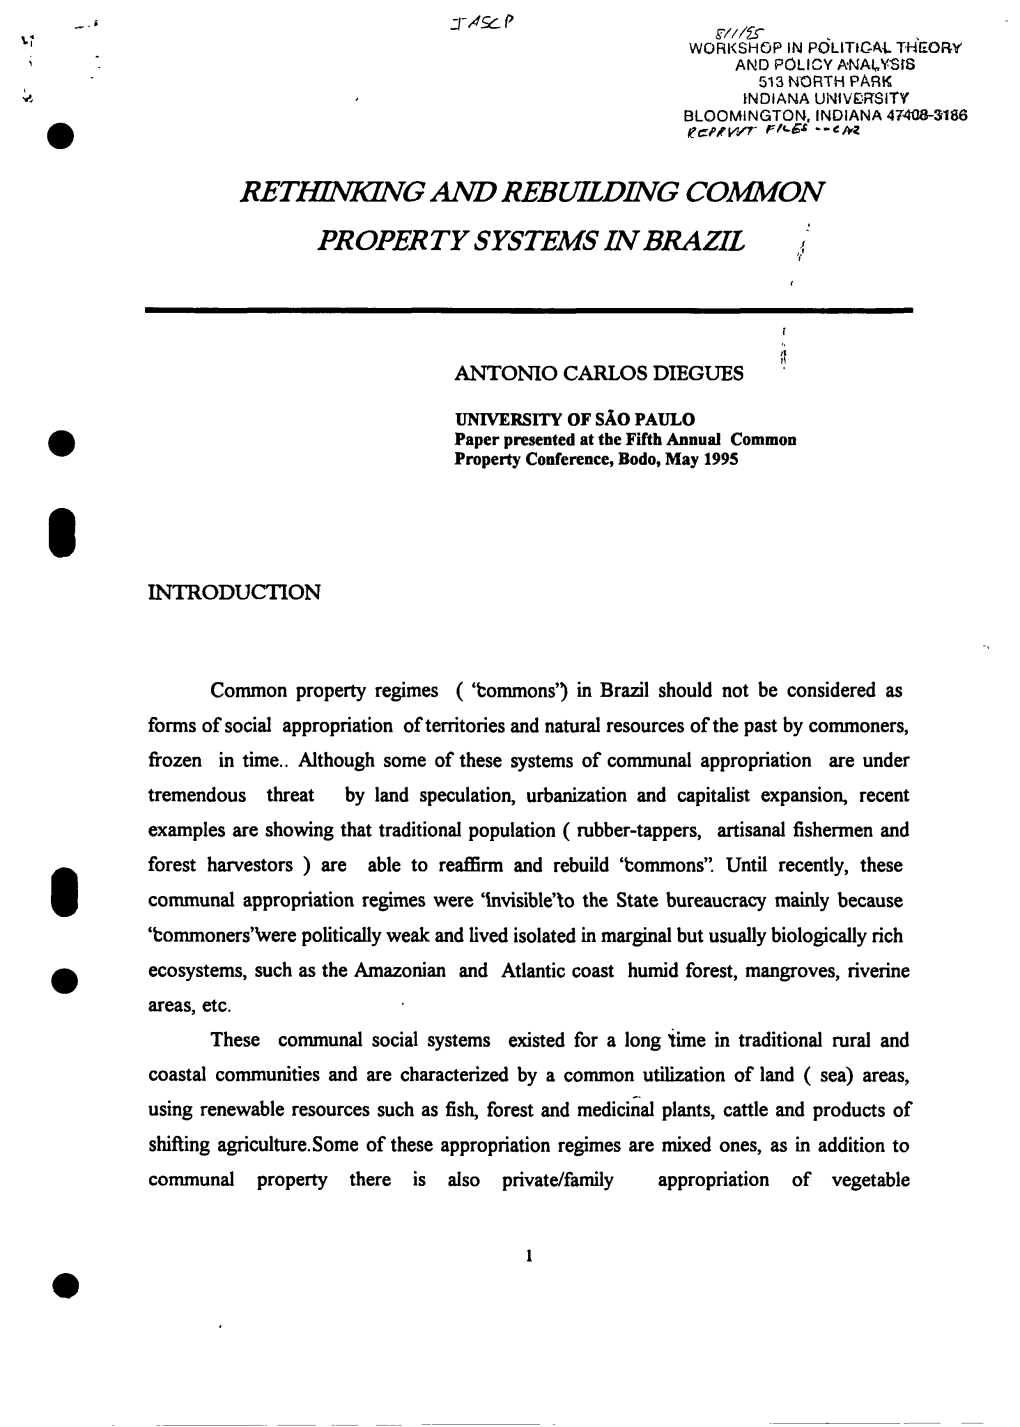 Rethinking and Rebuilding Common Property Systems in Brazil